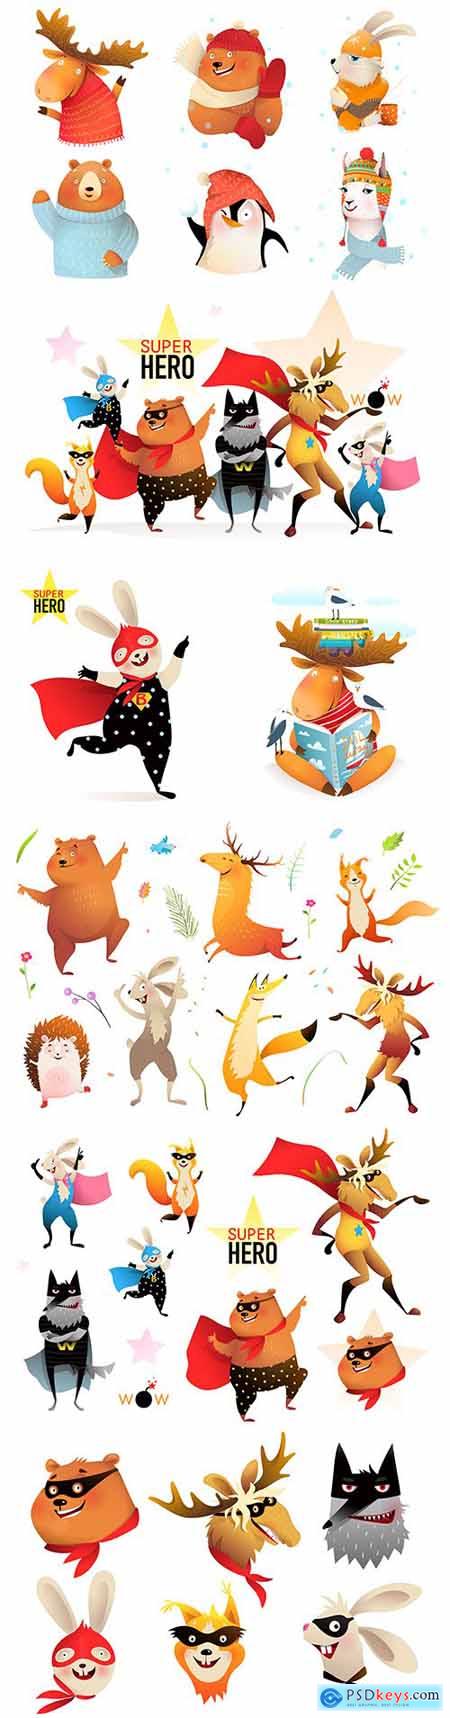 Wild animals and collection painted illustrations superheroes